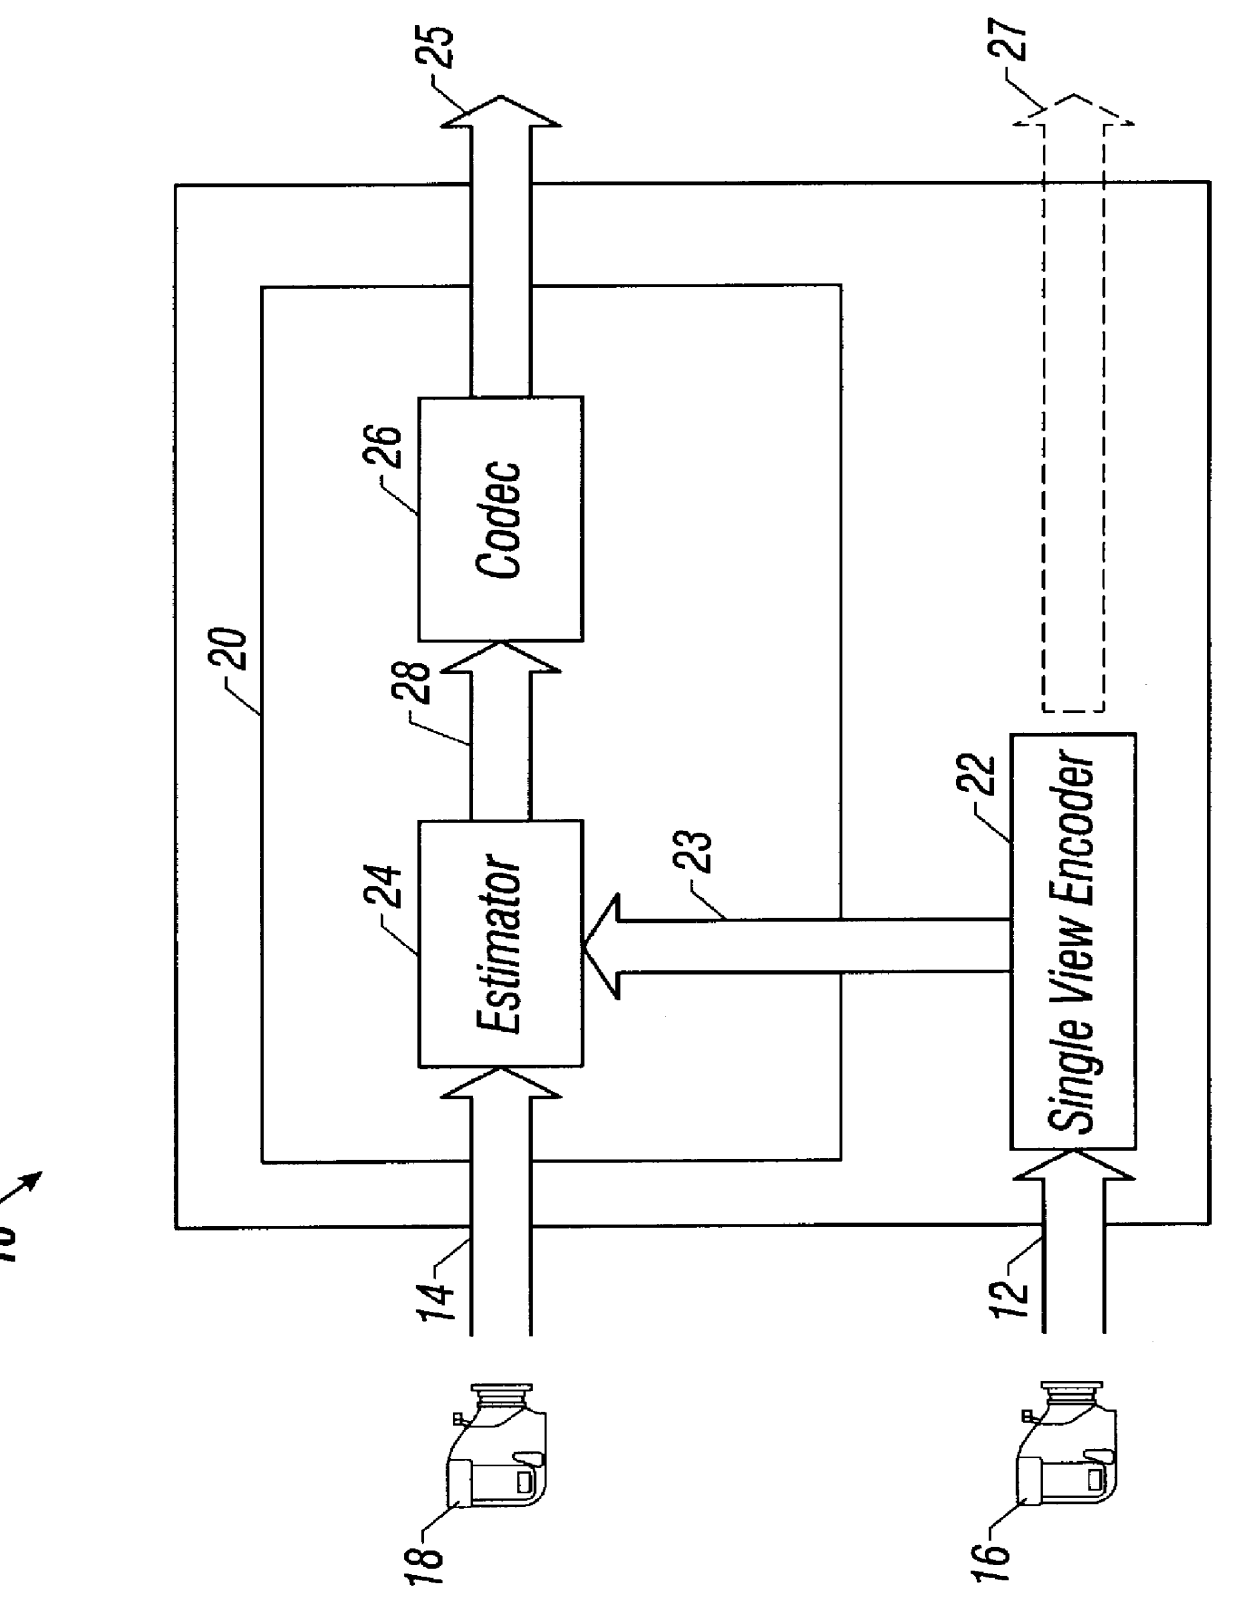 Method and apparatus for compressing multi-view video